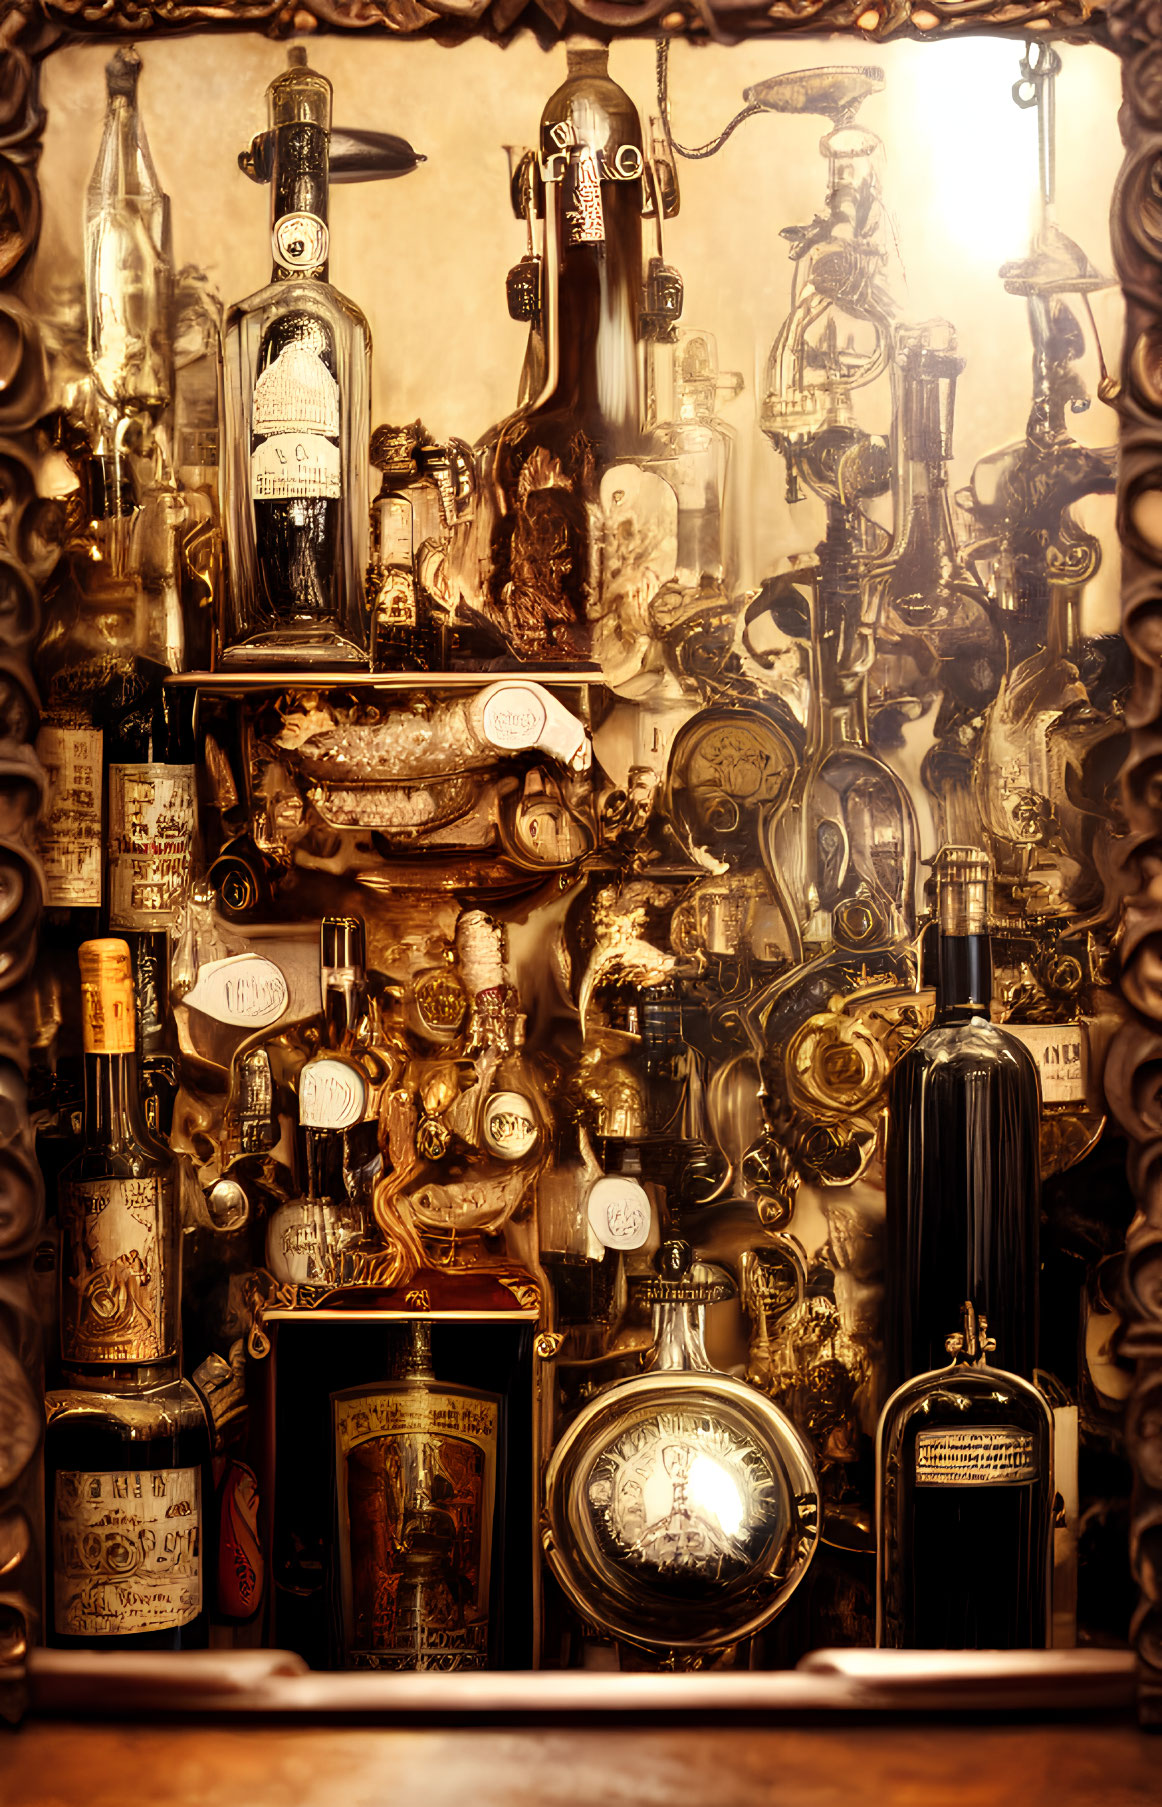 Vintage antique bottles and clocks with intricate designs on reflective backdrop